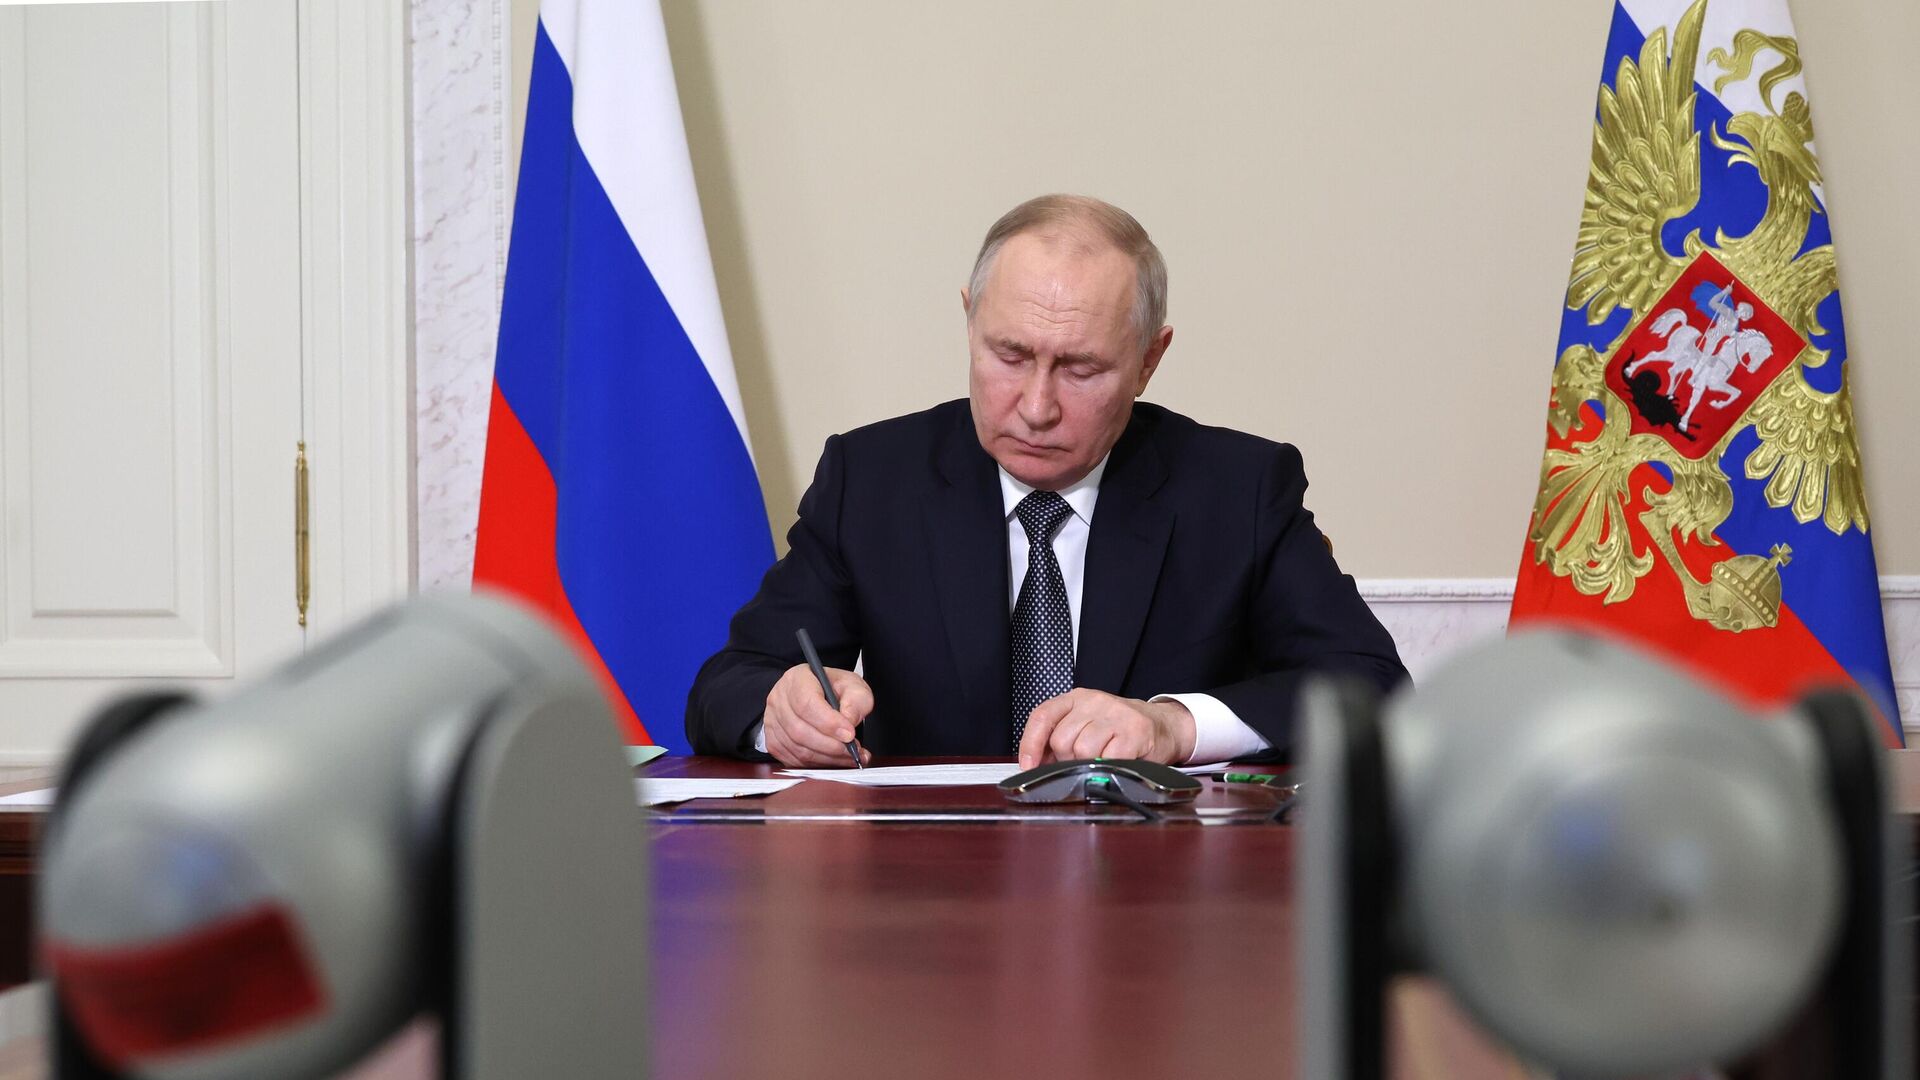 Putin signs law on tax breaks for aquatic biological resources